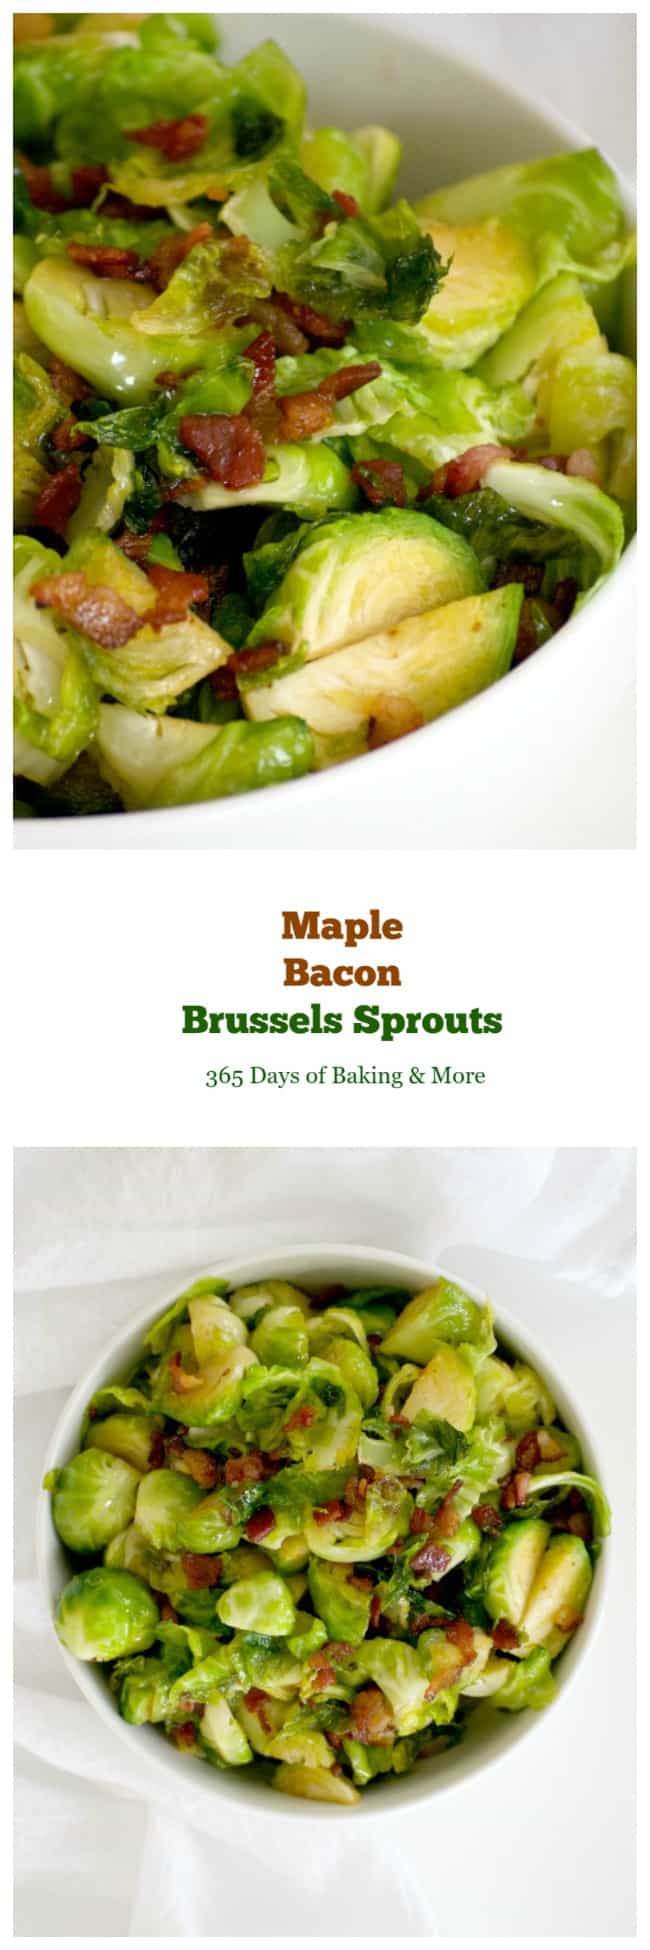 These Maple Bacon Brussels Sprouts are Brussels sprouts cooked in a skillet with bacon, some brown sugar and maple syrup. This is a great side dish to serve with any dinner and will convert your Brussels sprouts hater.